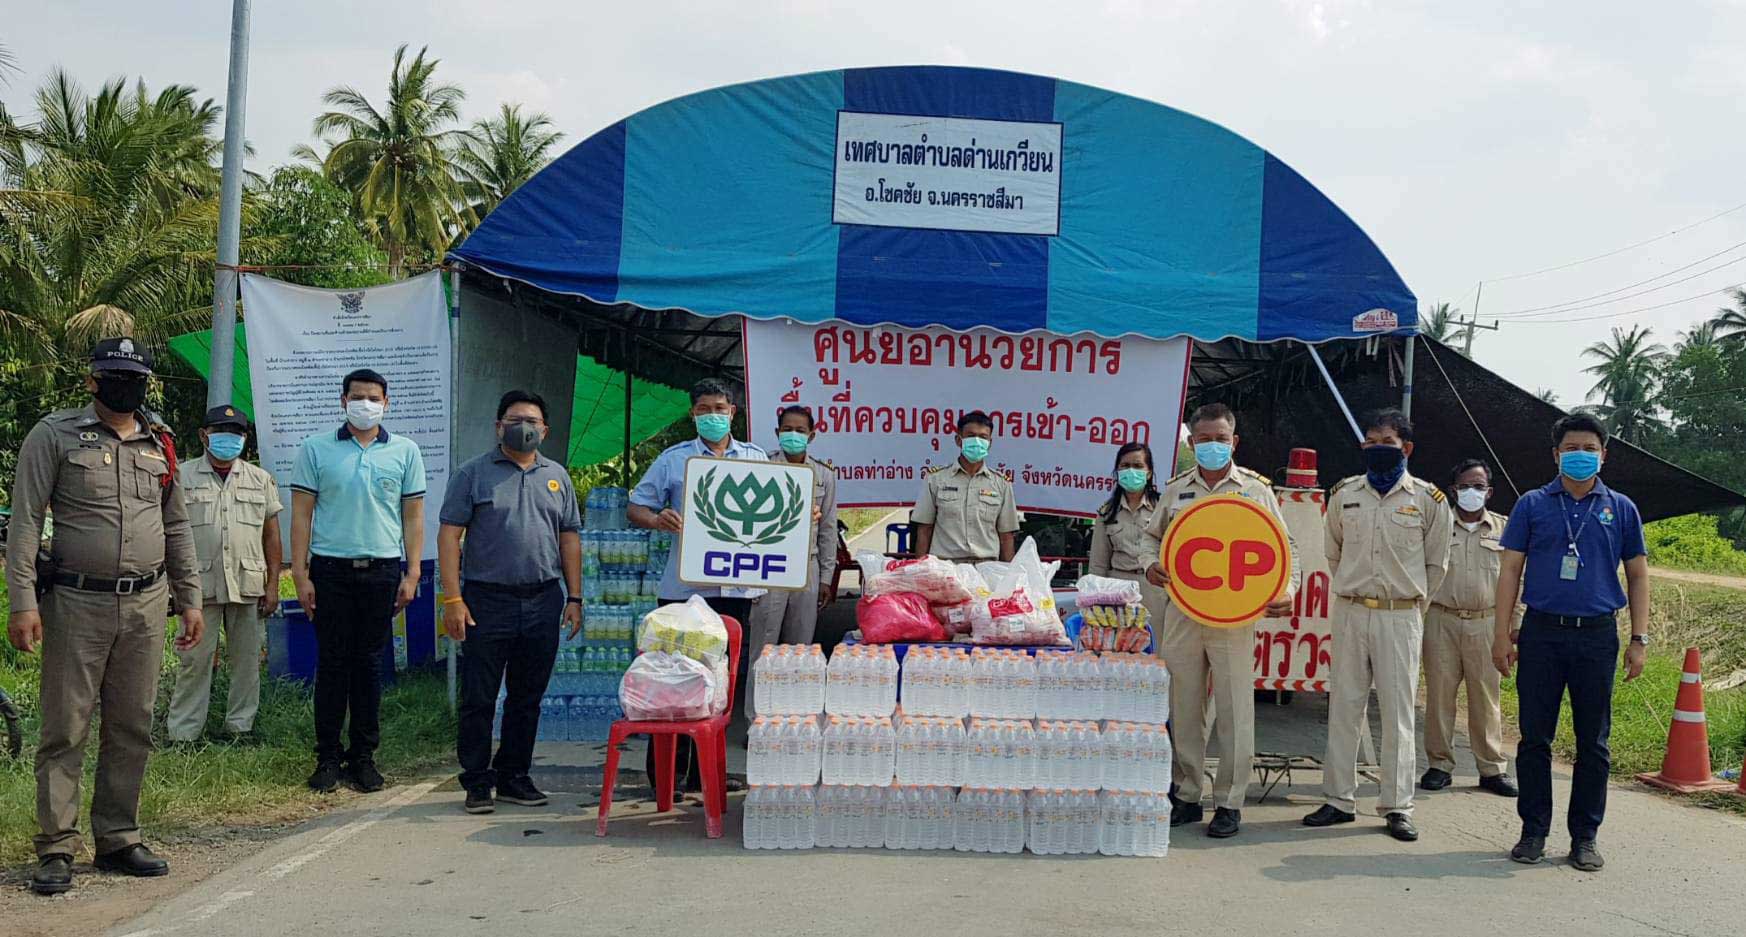 CPF lends a helping hand to community ensuring safety society against COVID-19 crisis